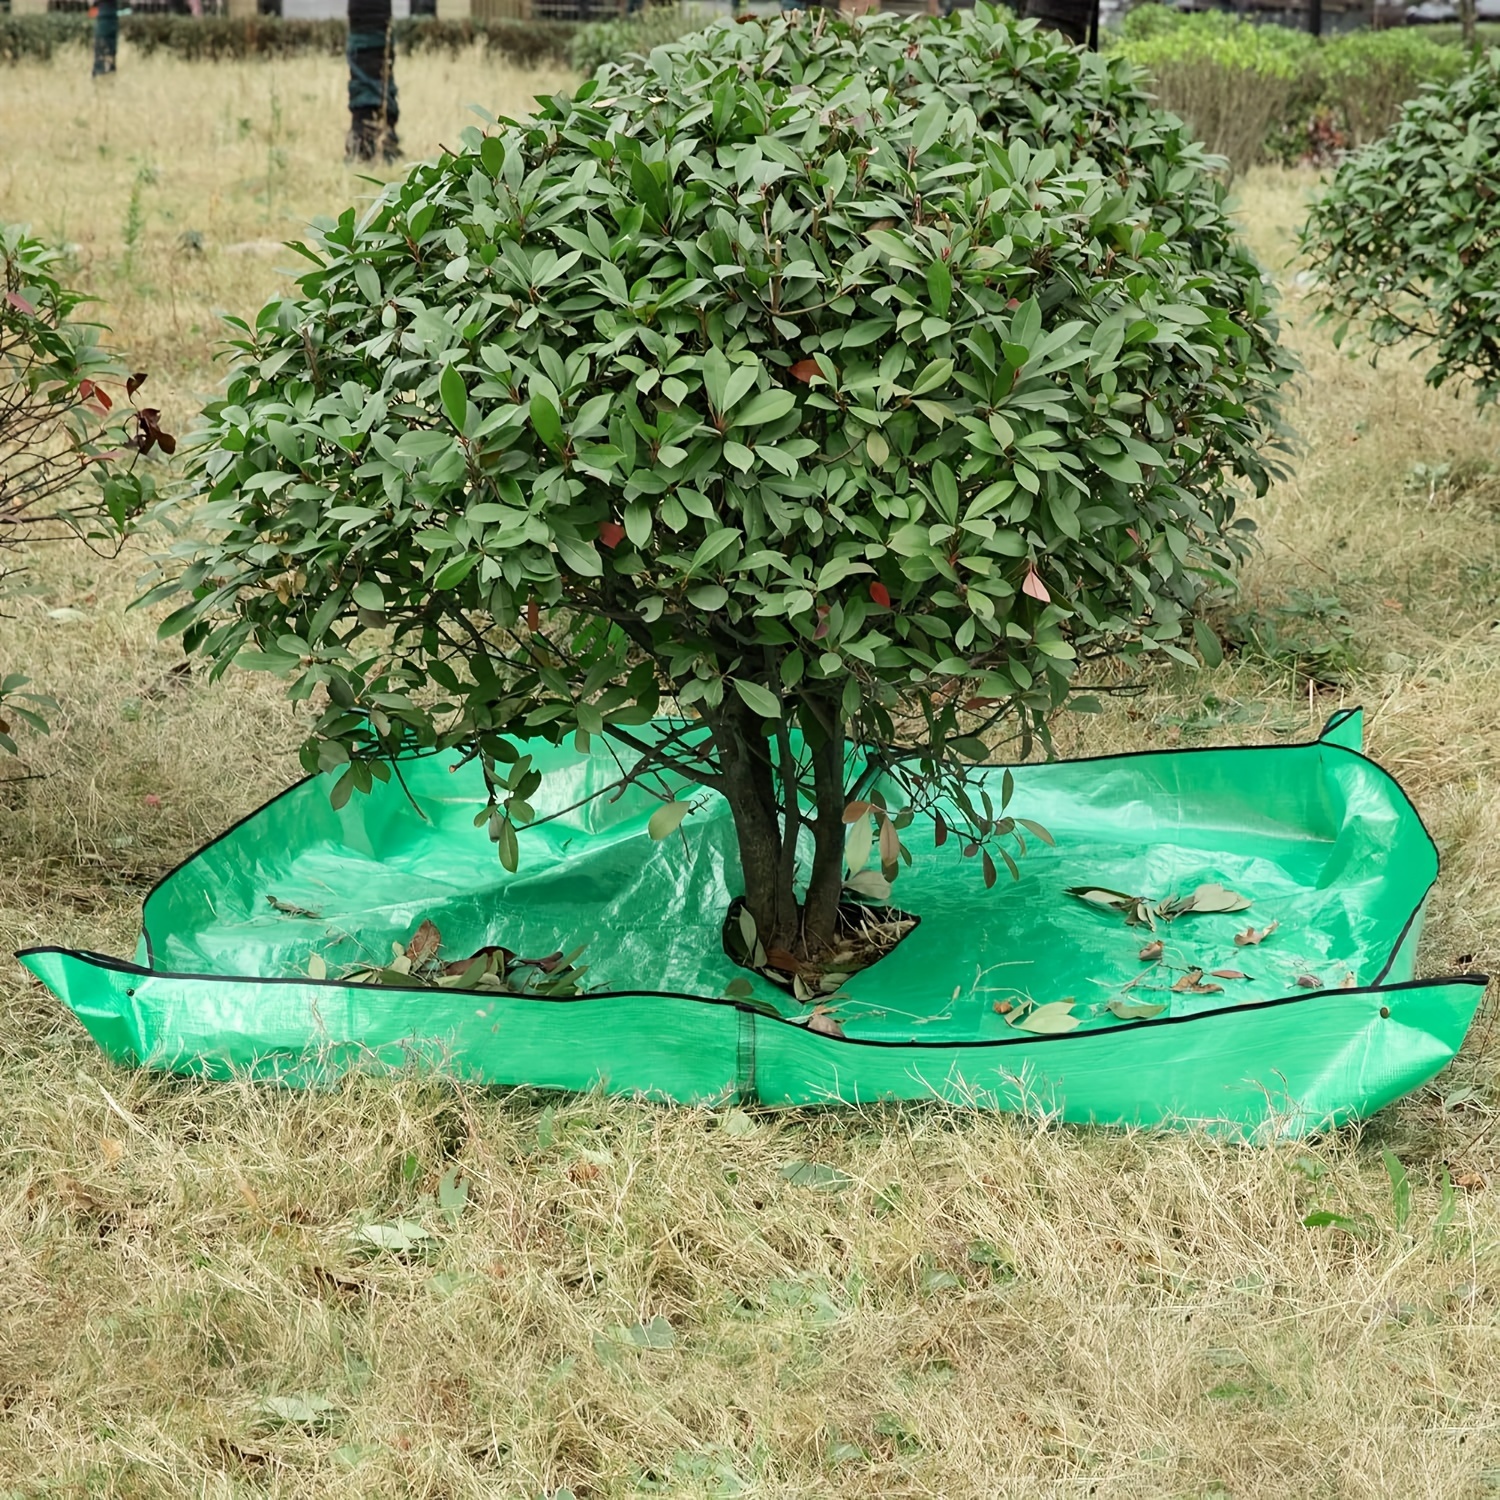 

Reusable Pe Landscape Tarp 78.74" X 78.74" - Waterproof Garden Tarp With Corner Buckles For Tree And Shrub Pruning Accessories, Ideal For Yard Waste Collection